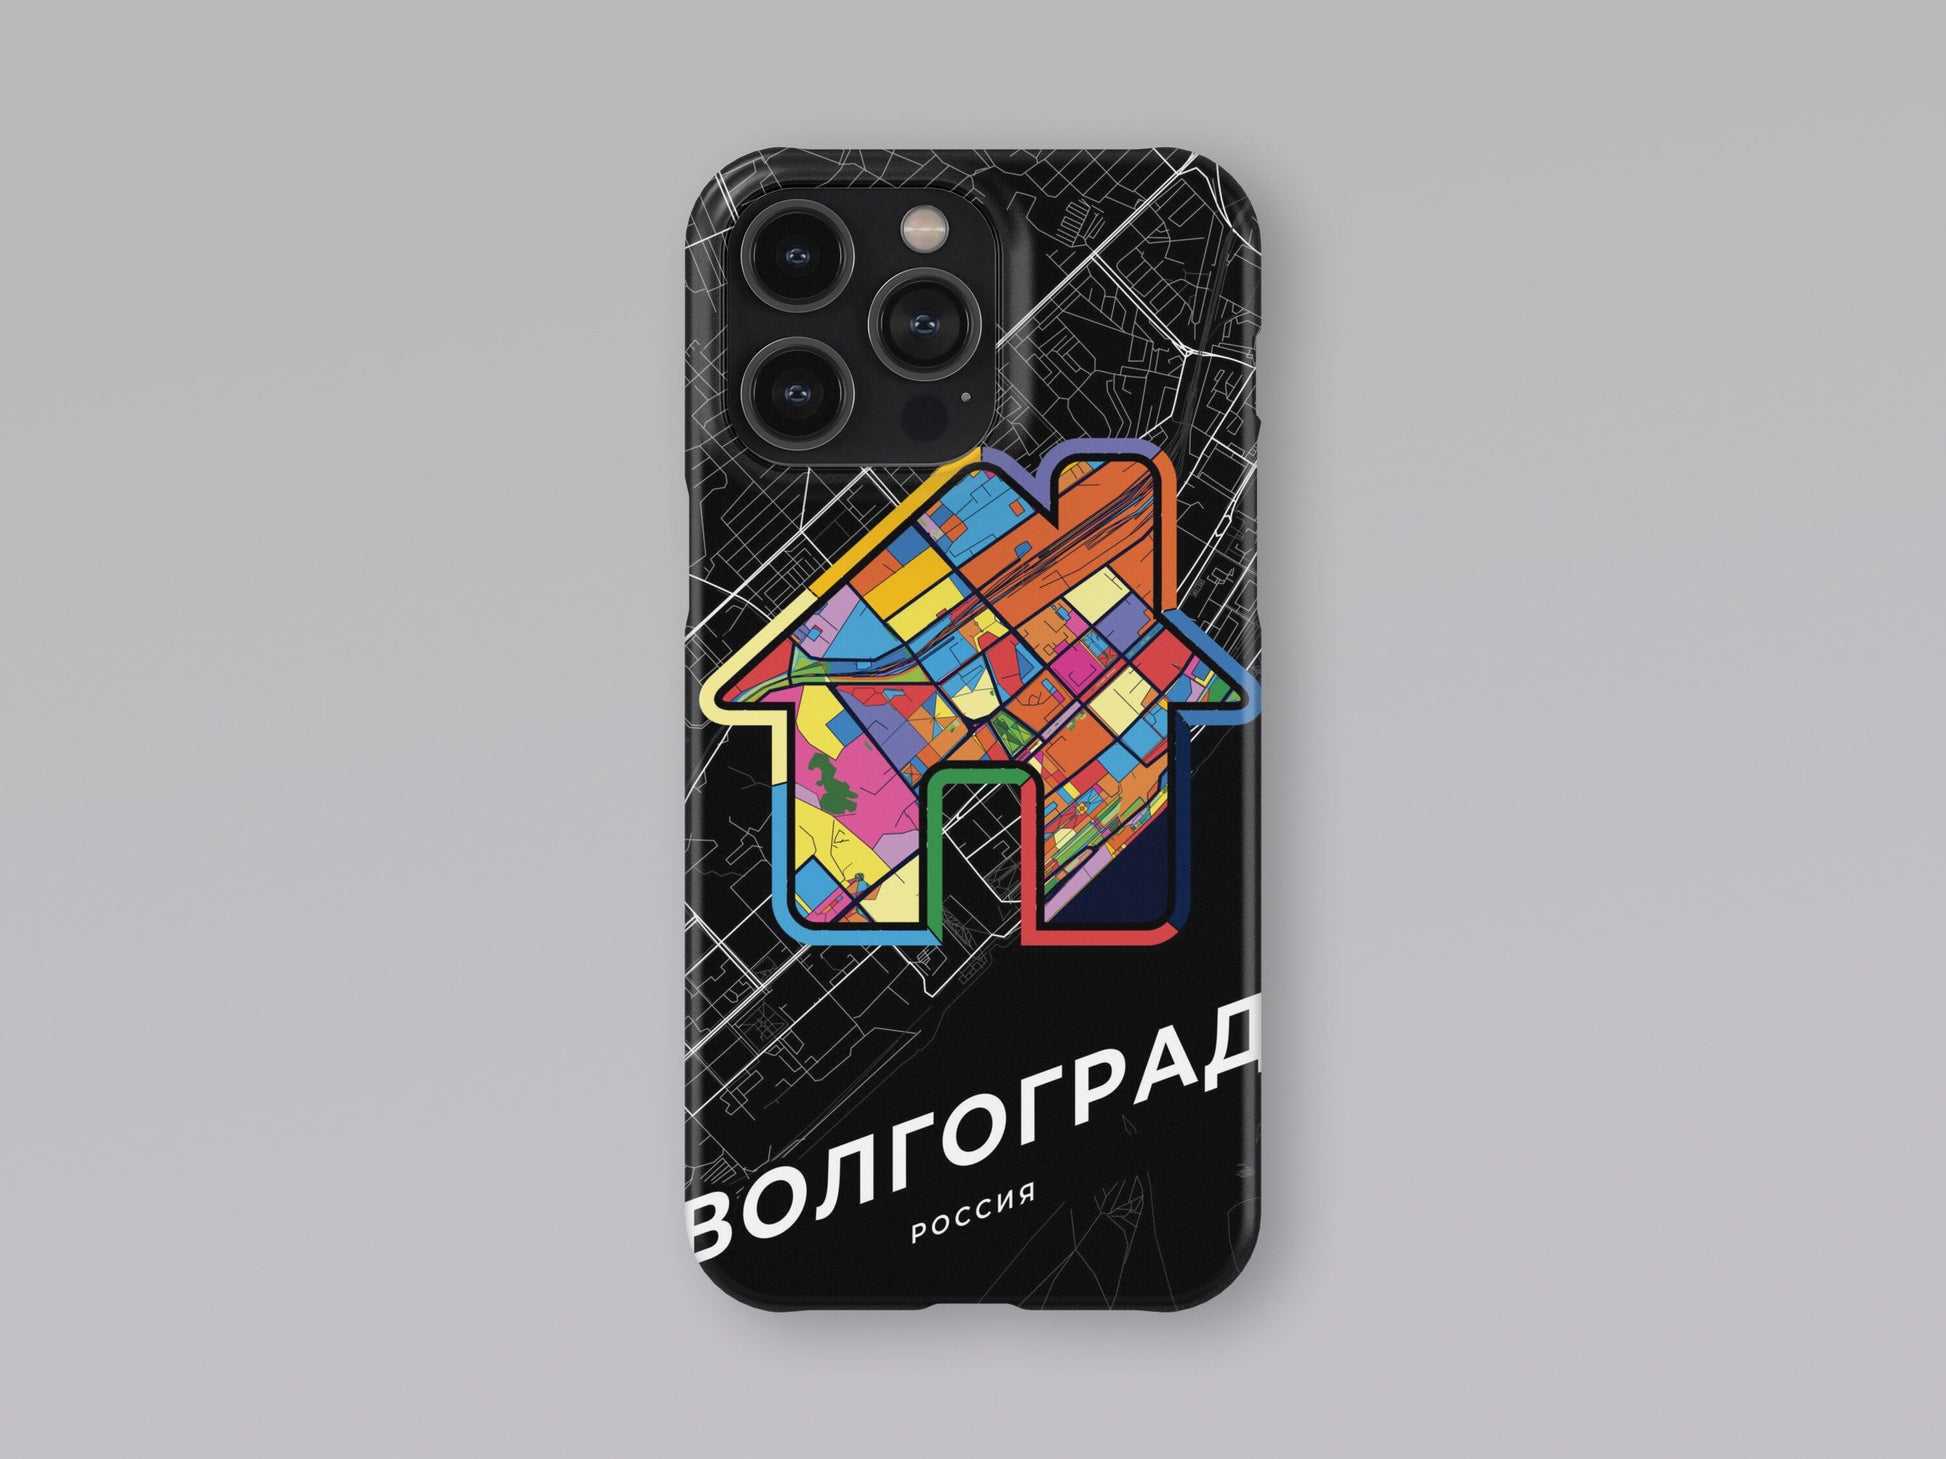 Volgograd Russia slim phone case with colorful icon. Birthday, wedding or housewarming gift. Couple match cases. 3